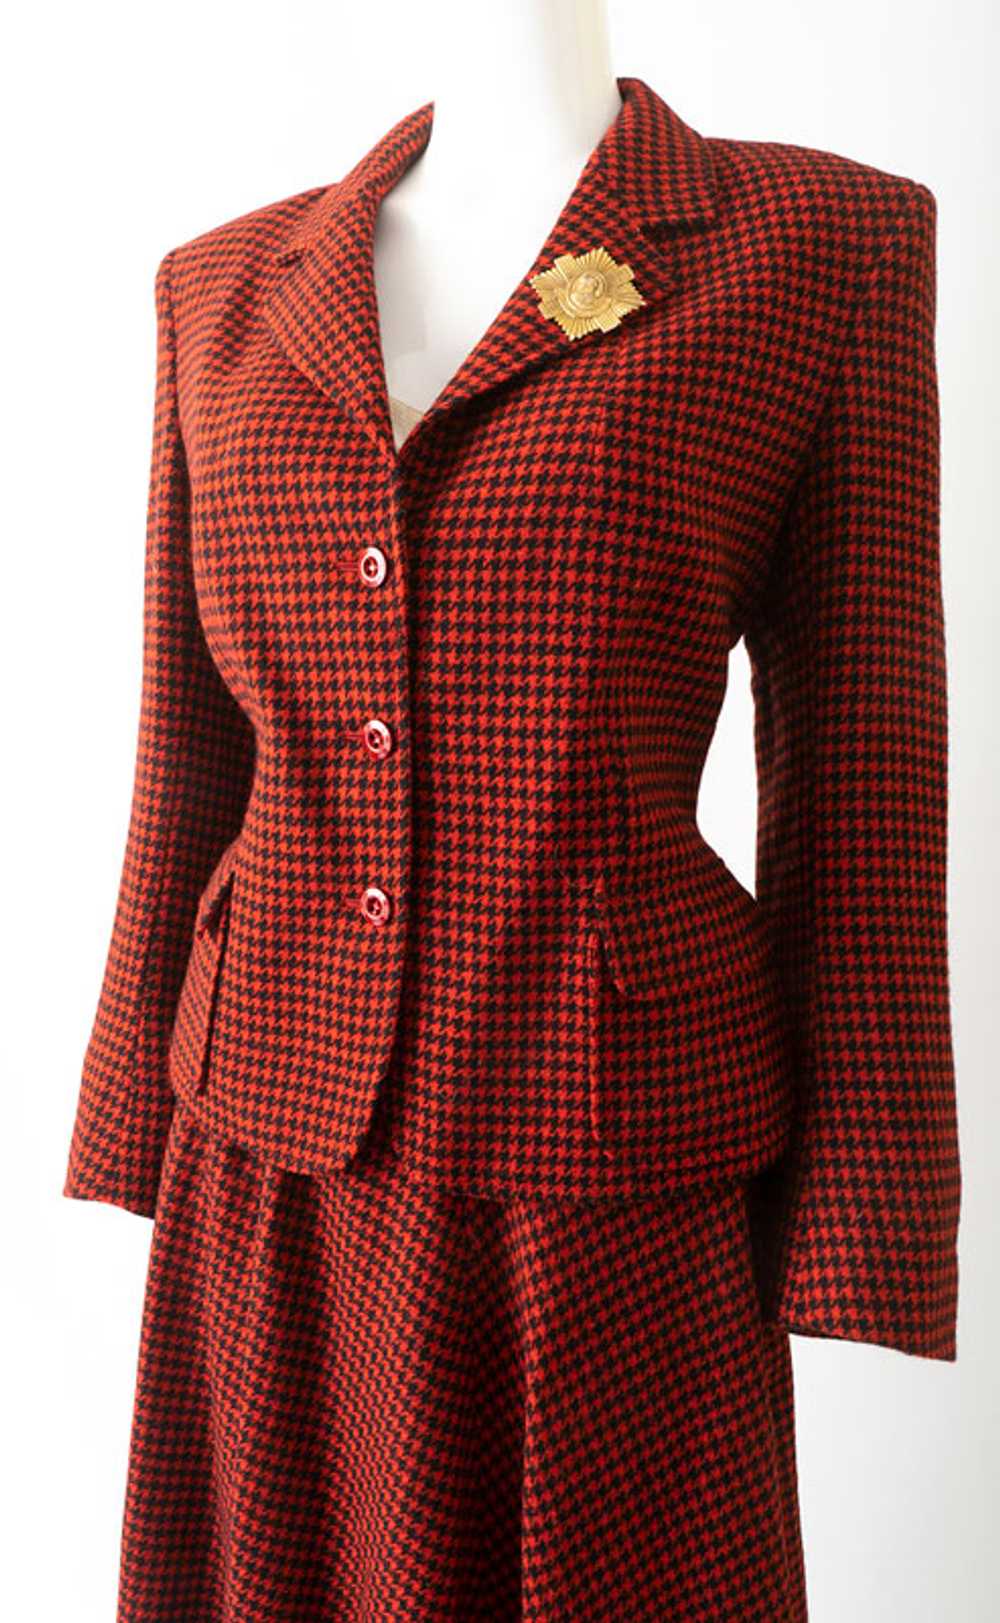 Fab 80s Jaeger Houndstooth Outfit - image 3